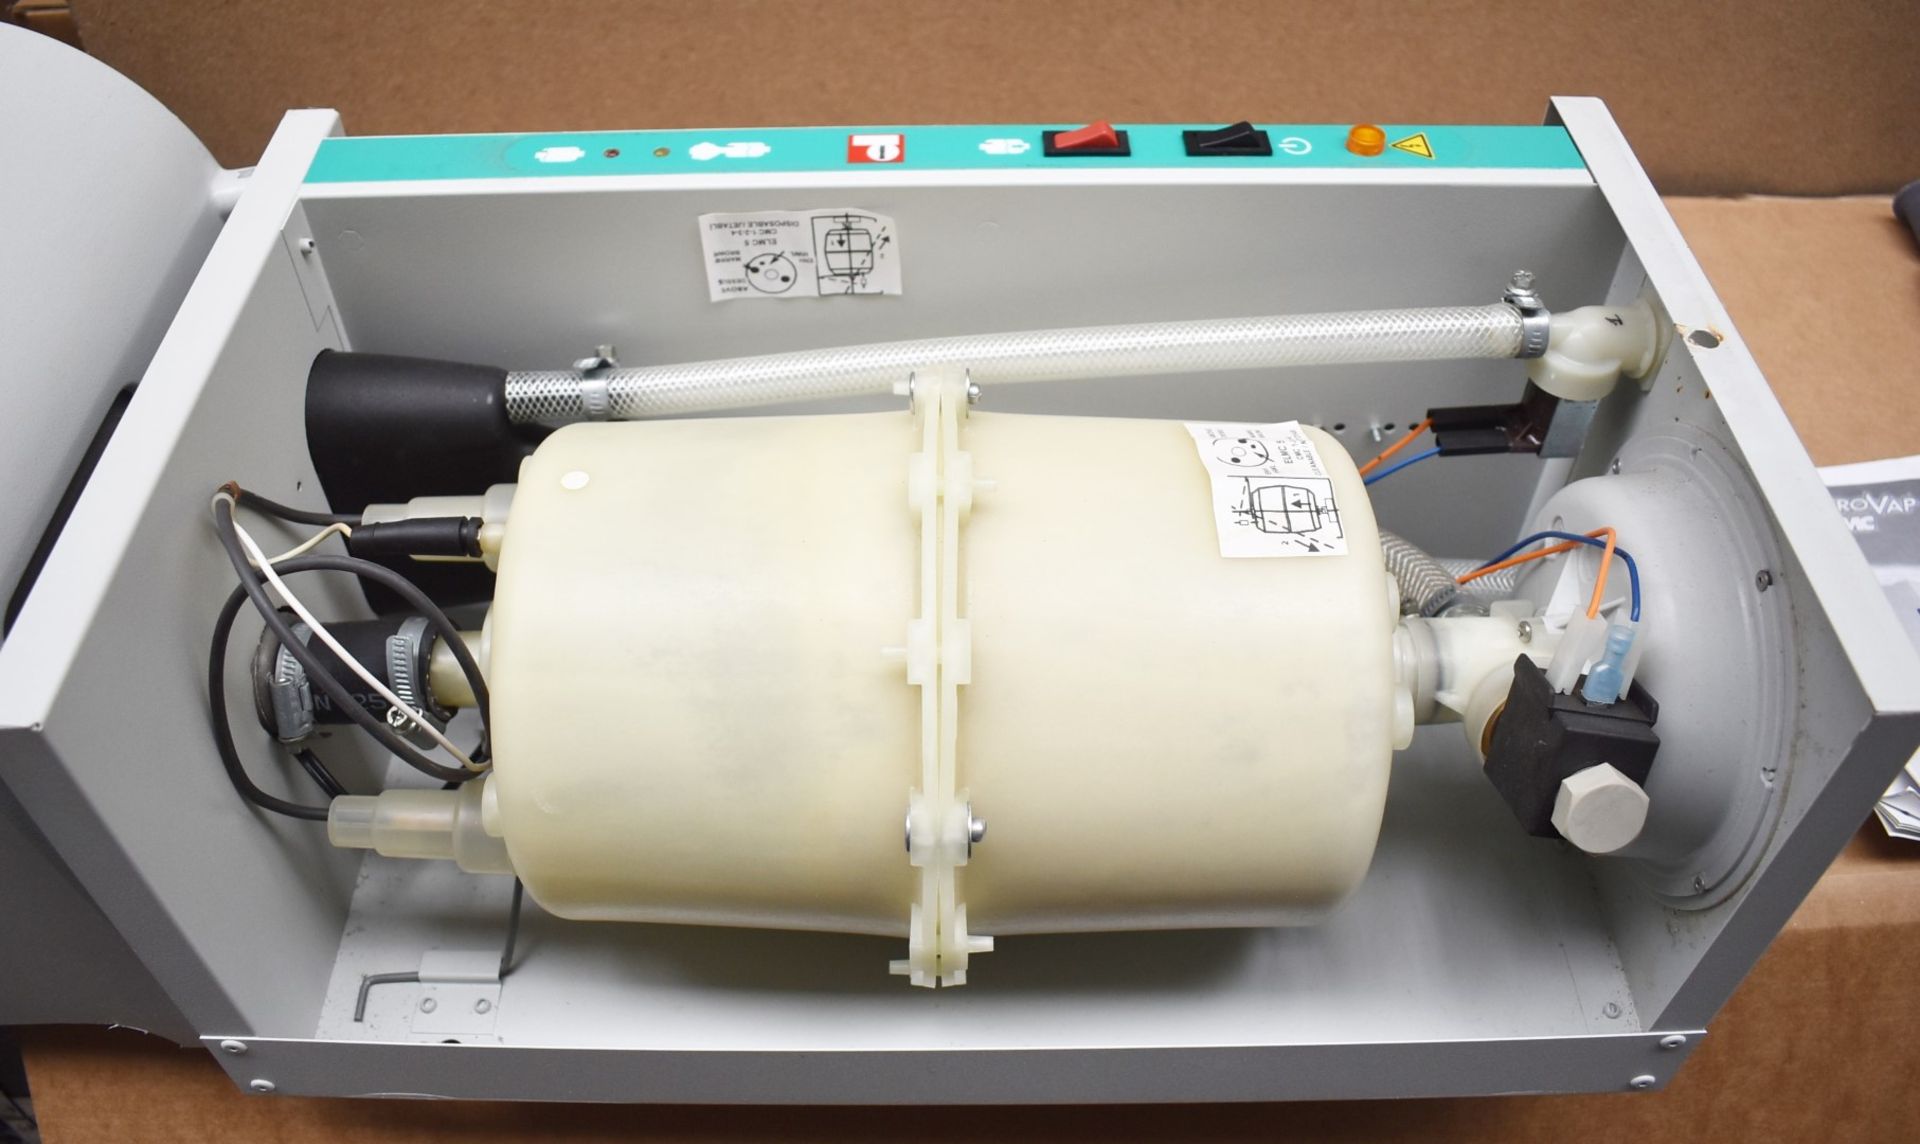 1 x Electrovap MC2 Electrode Boiler Steam Humidifier - Model CMC1 - Wall Mounted - CL011 - Removed - Image 7 of 7